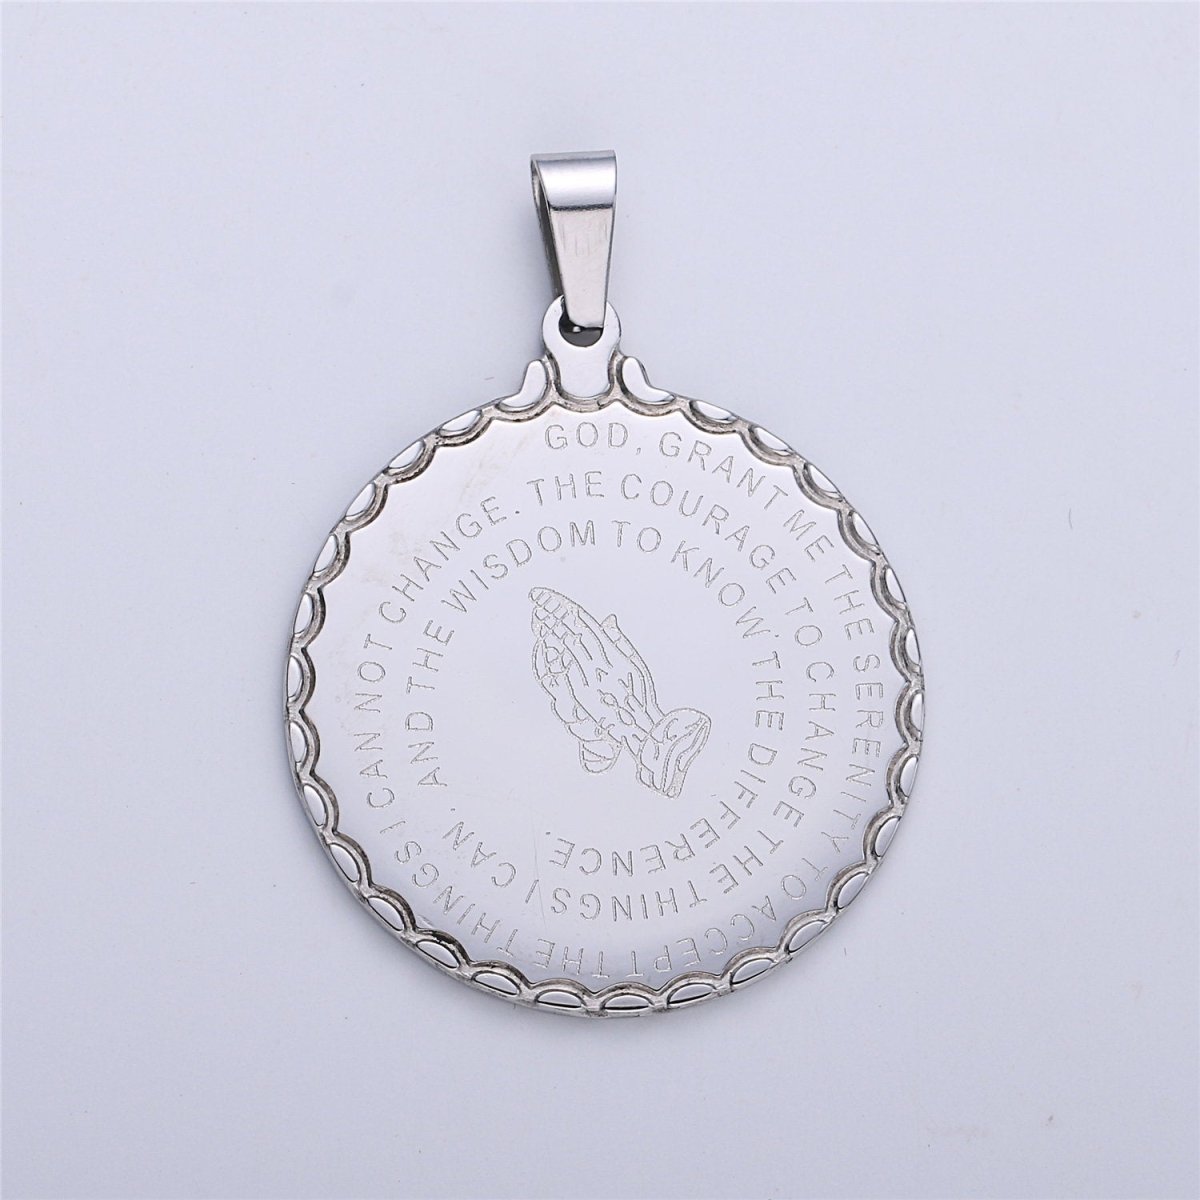 Gold Filled Double Sided Serenity Prayer & Lords Prayer Stainless Steel Charm - Lord grant me Coin Medallion Pendant Religious Jewelry J-724 J-727 - DLUXCA